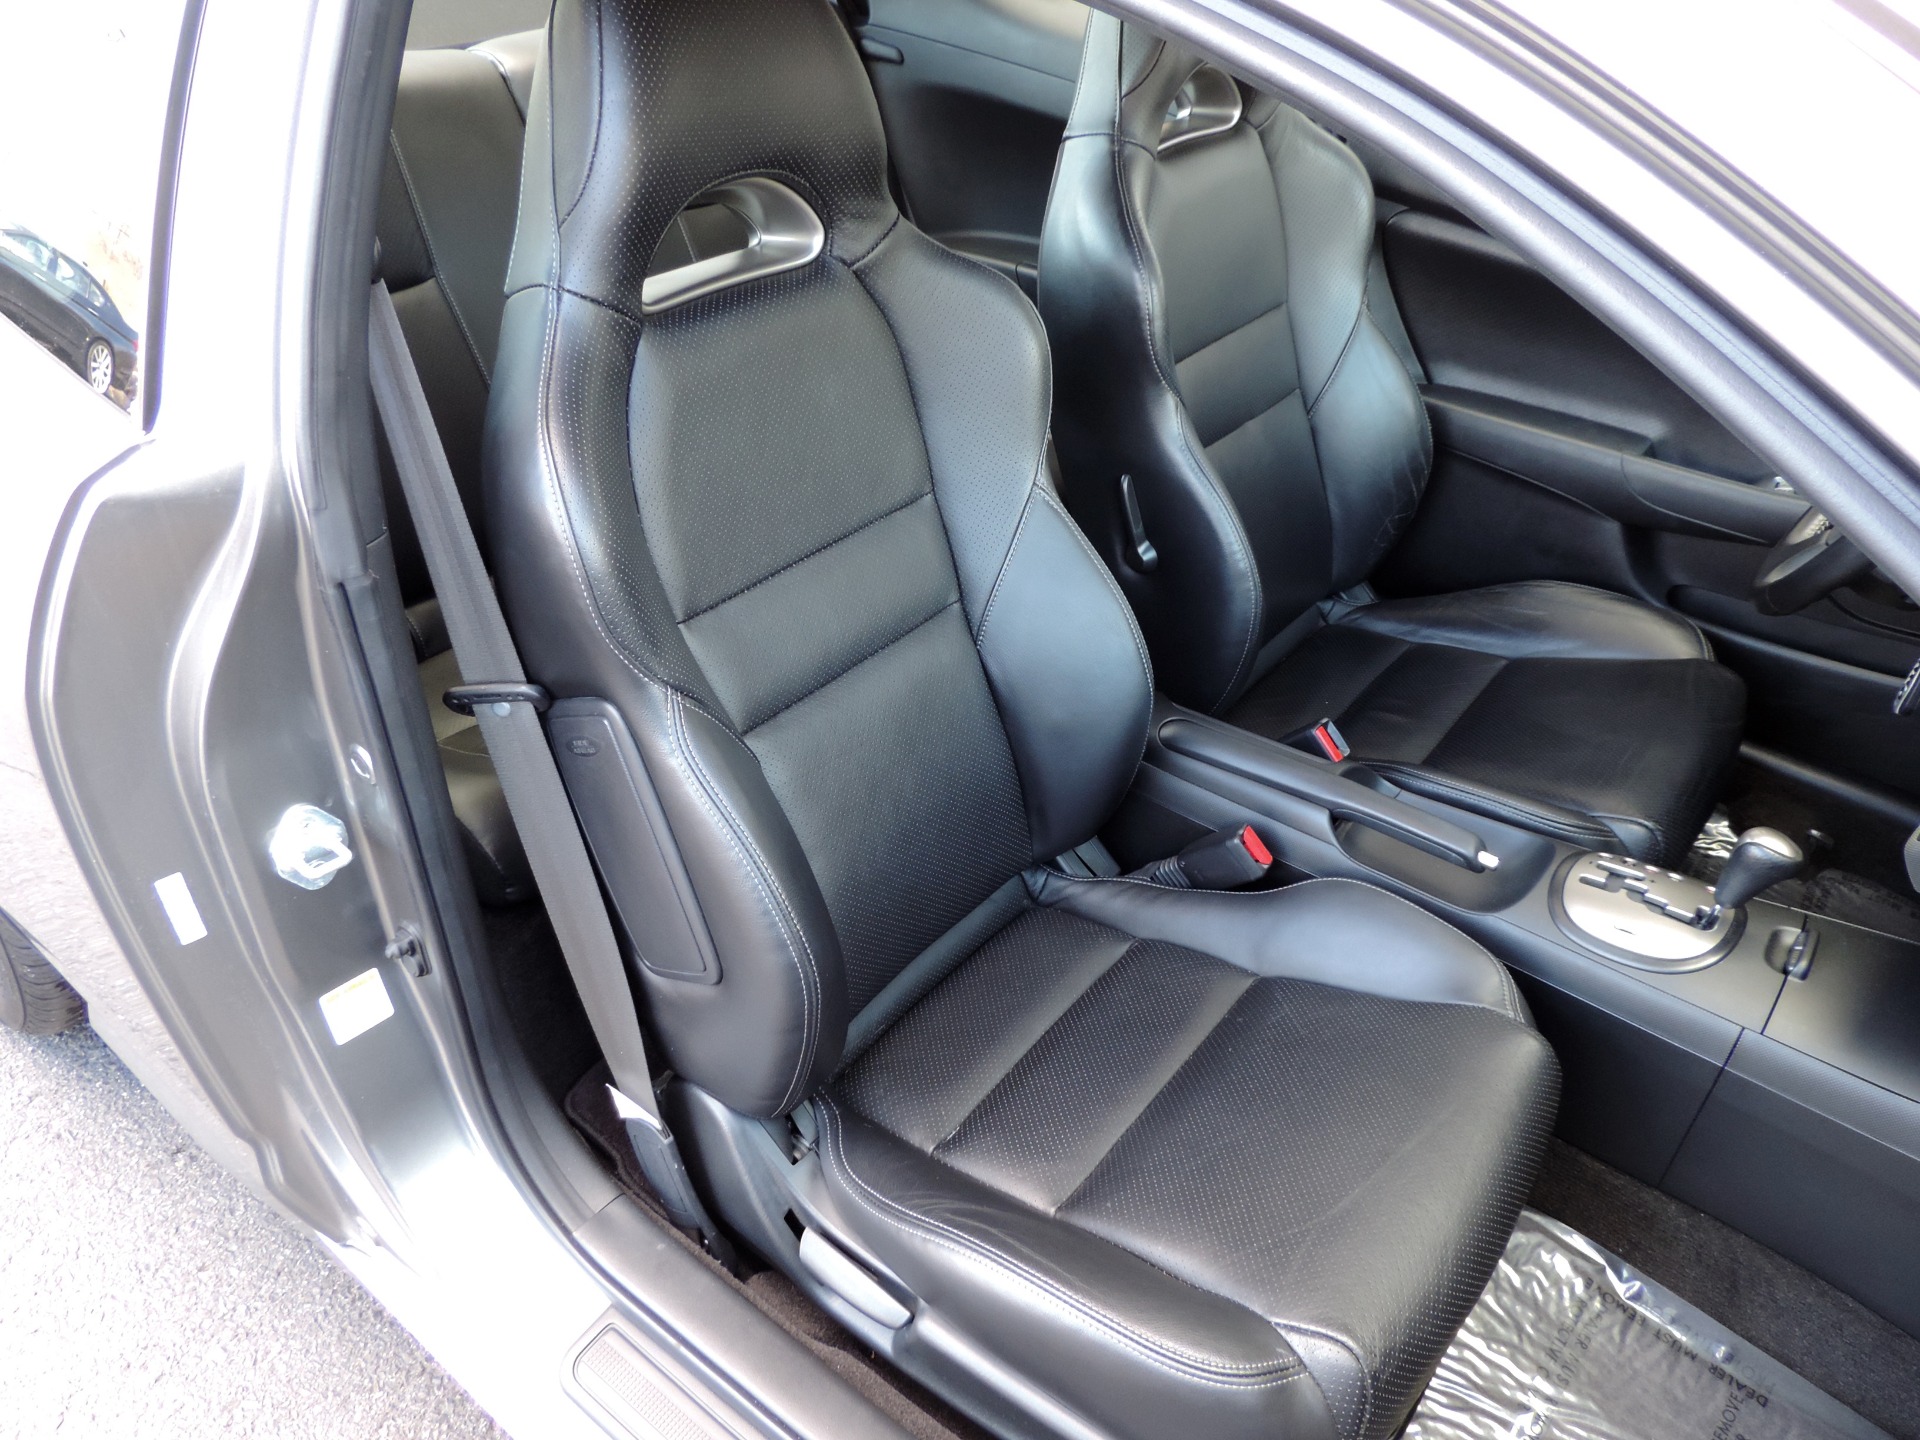 2006 Acura Rsx W Leather Stock 006693 For Sale Near